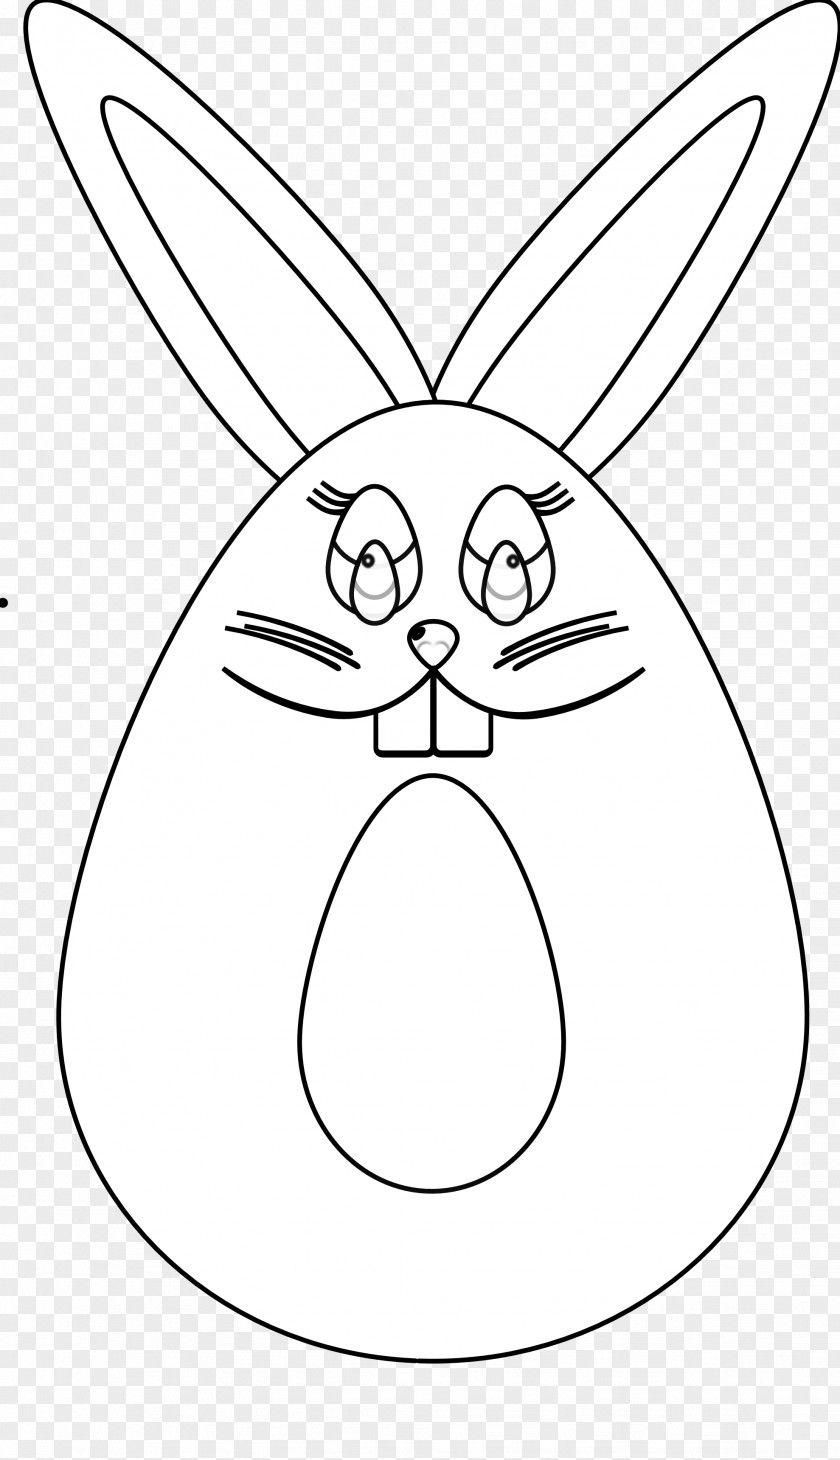 Waster Bunny Domestic Rabbit Easter Black And White Hare Whiskers PNG